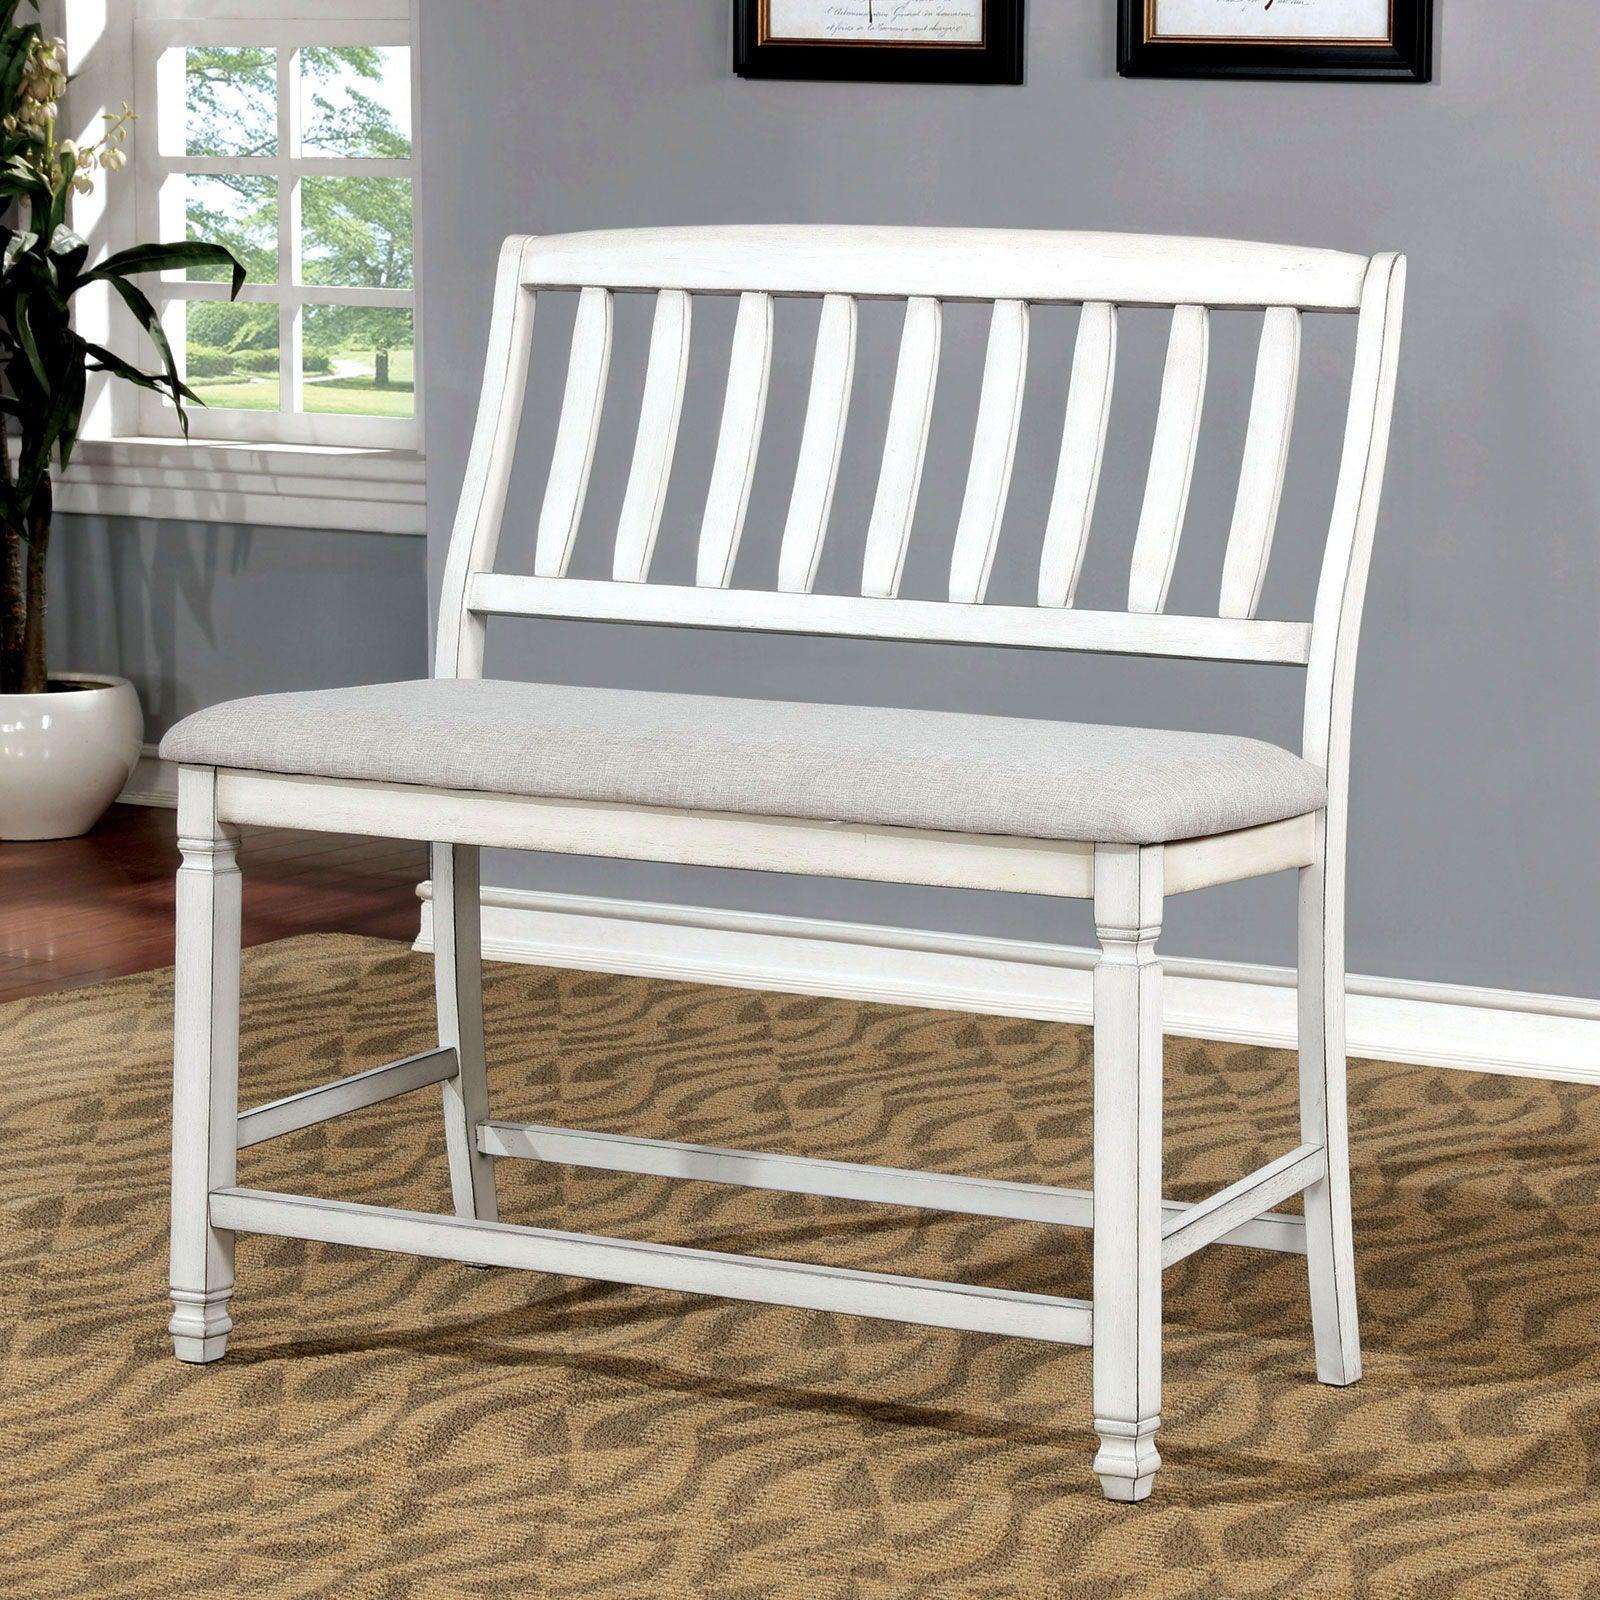 Furniture of America - Kaliyah - Counter Height Bench - Antique White - 5th Avenue Furniture